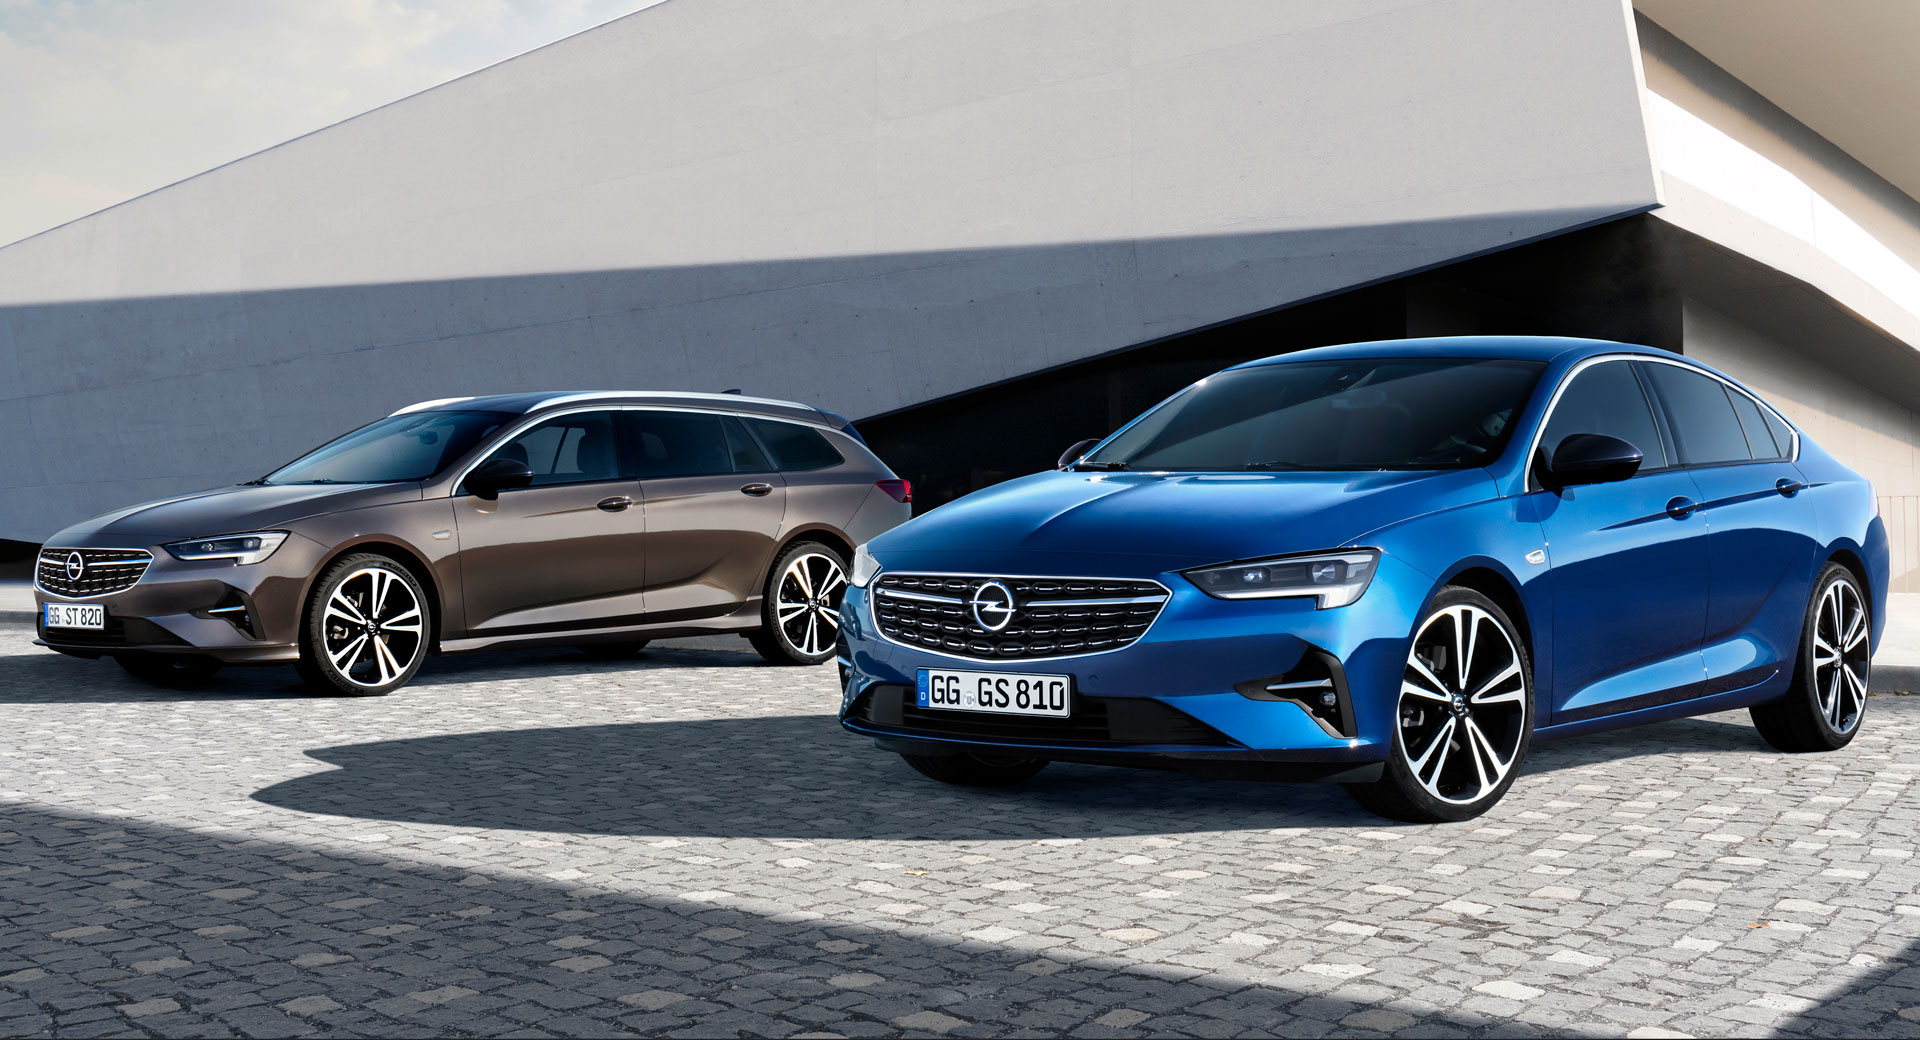 Opel And Vauxhall Insignia Revealed With Minor Styling And Tech Updates Carscoops